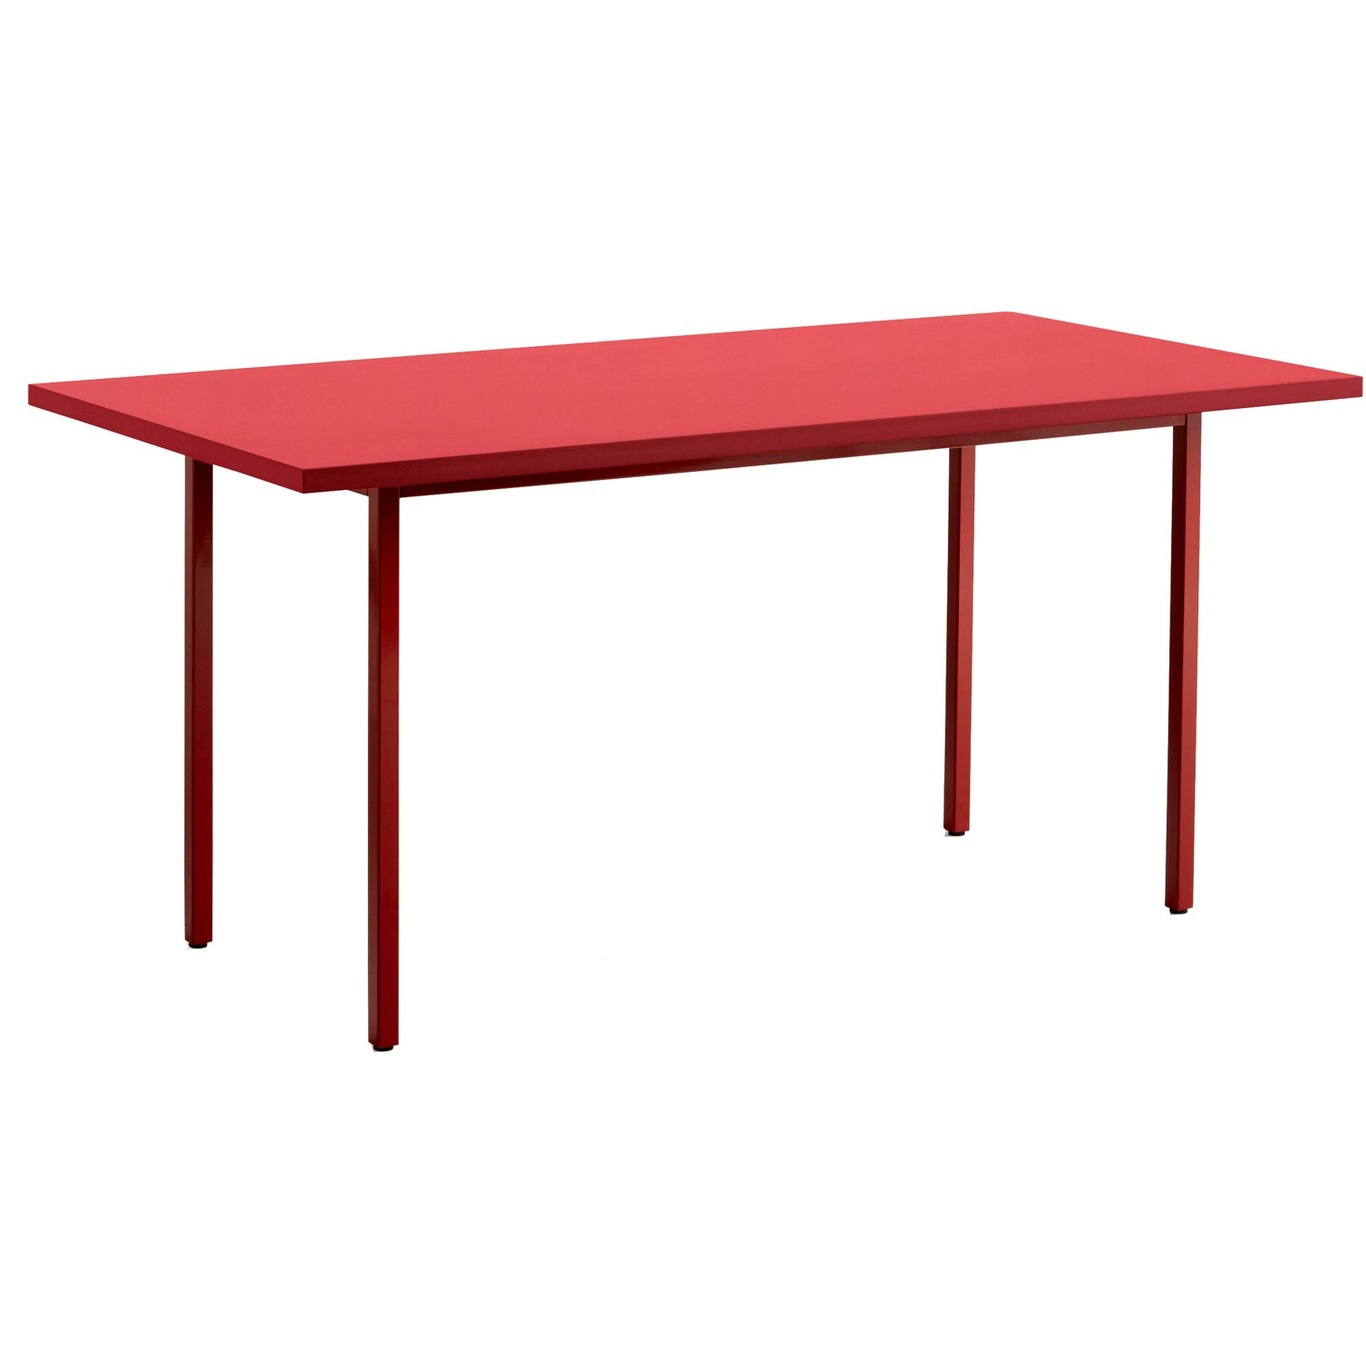 Two-Colour Table 160x82 cm, Wine / Red